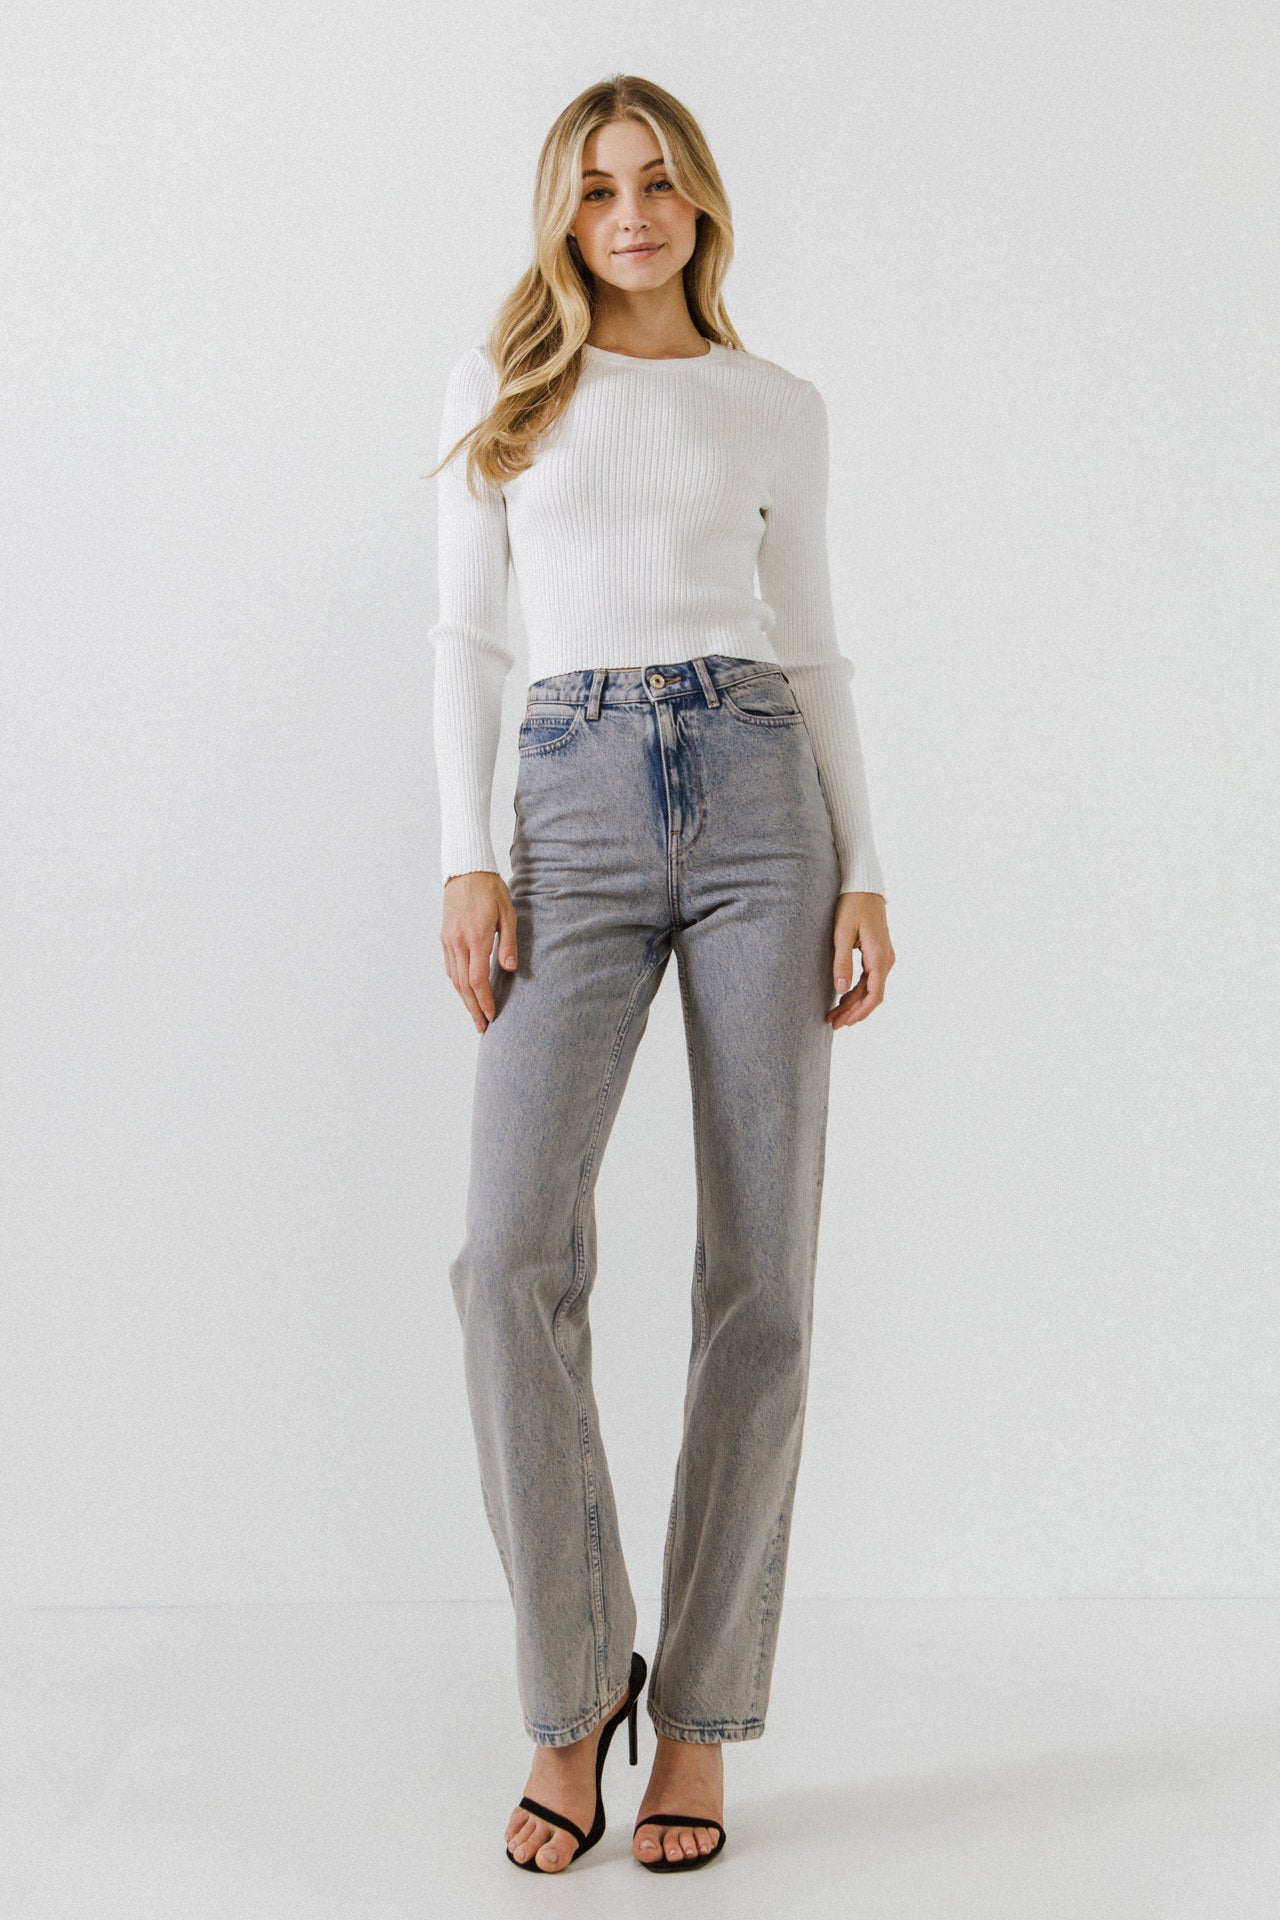 GREY LAB - Back Bow Cut Out Long Sleeve Top - TOPS available at Objectrare